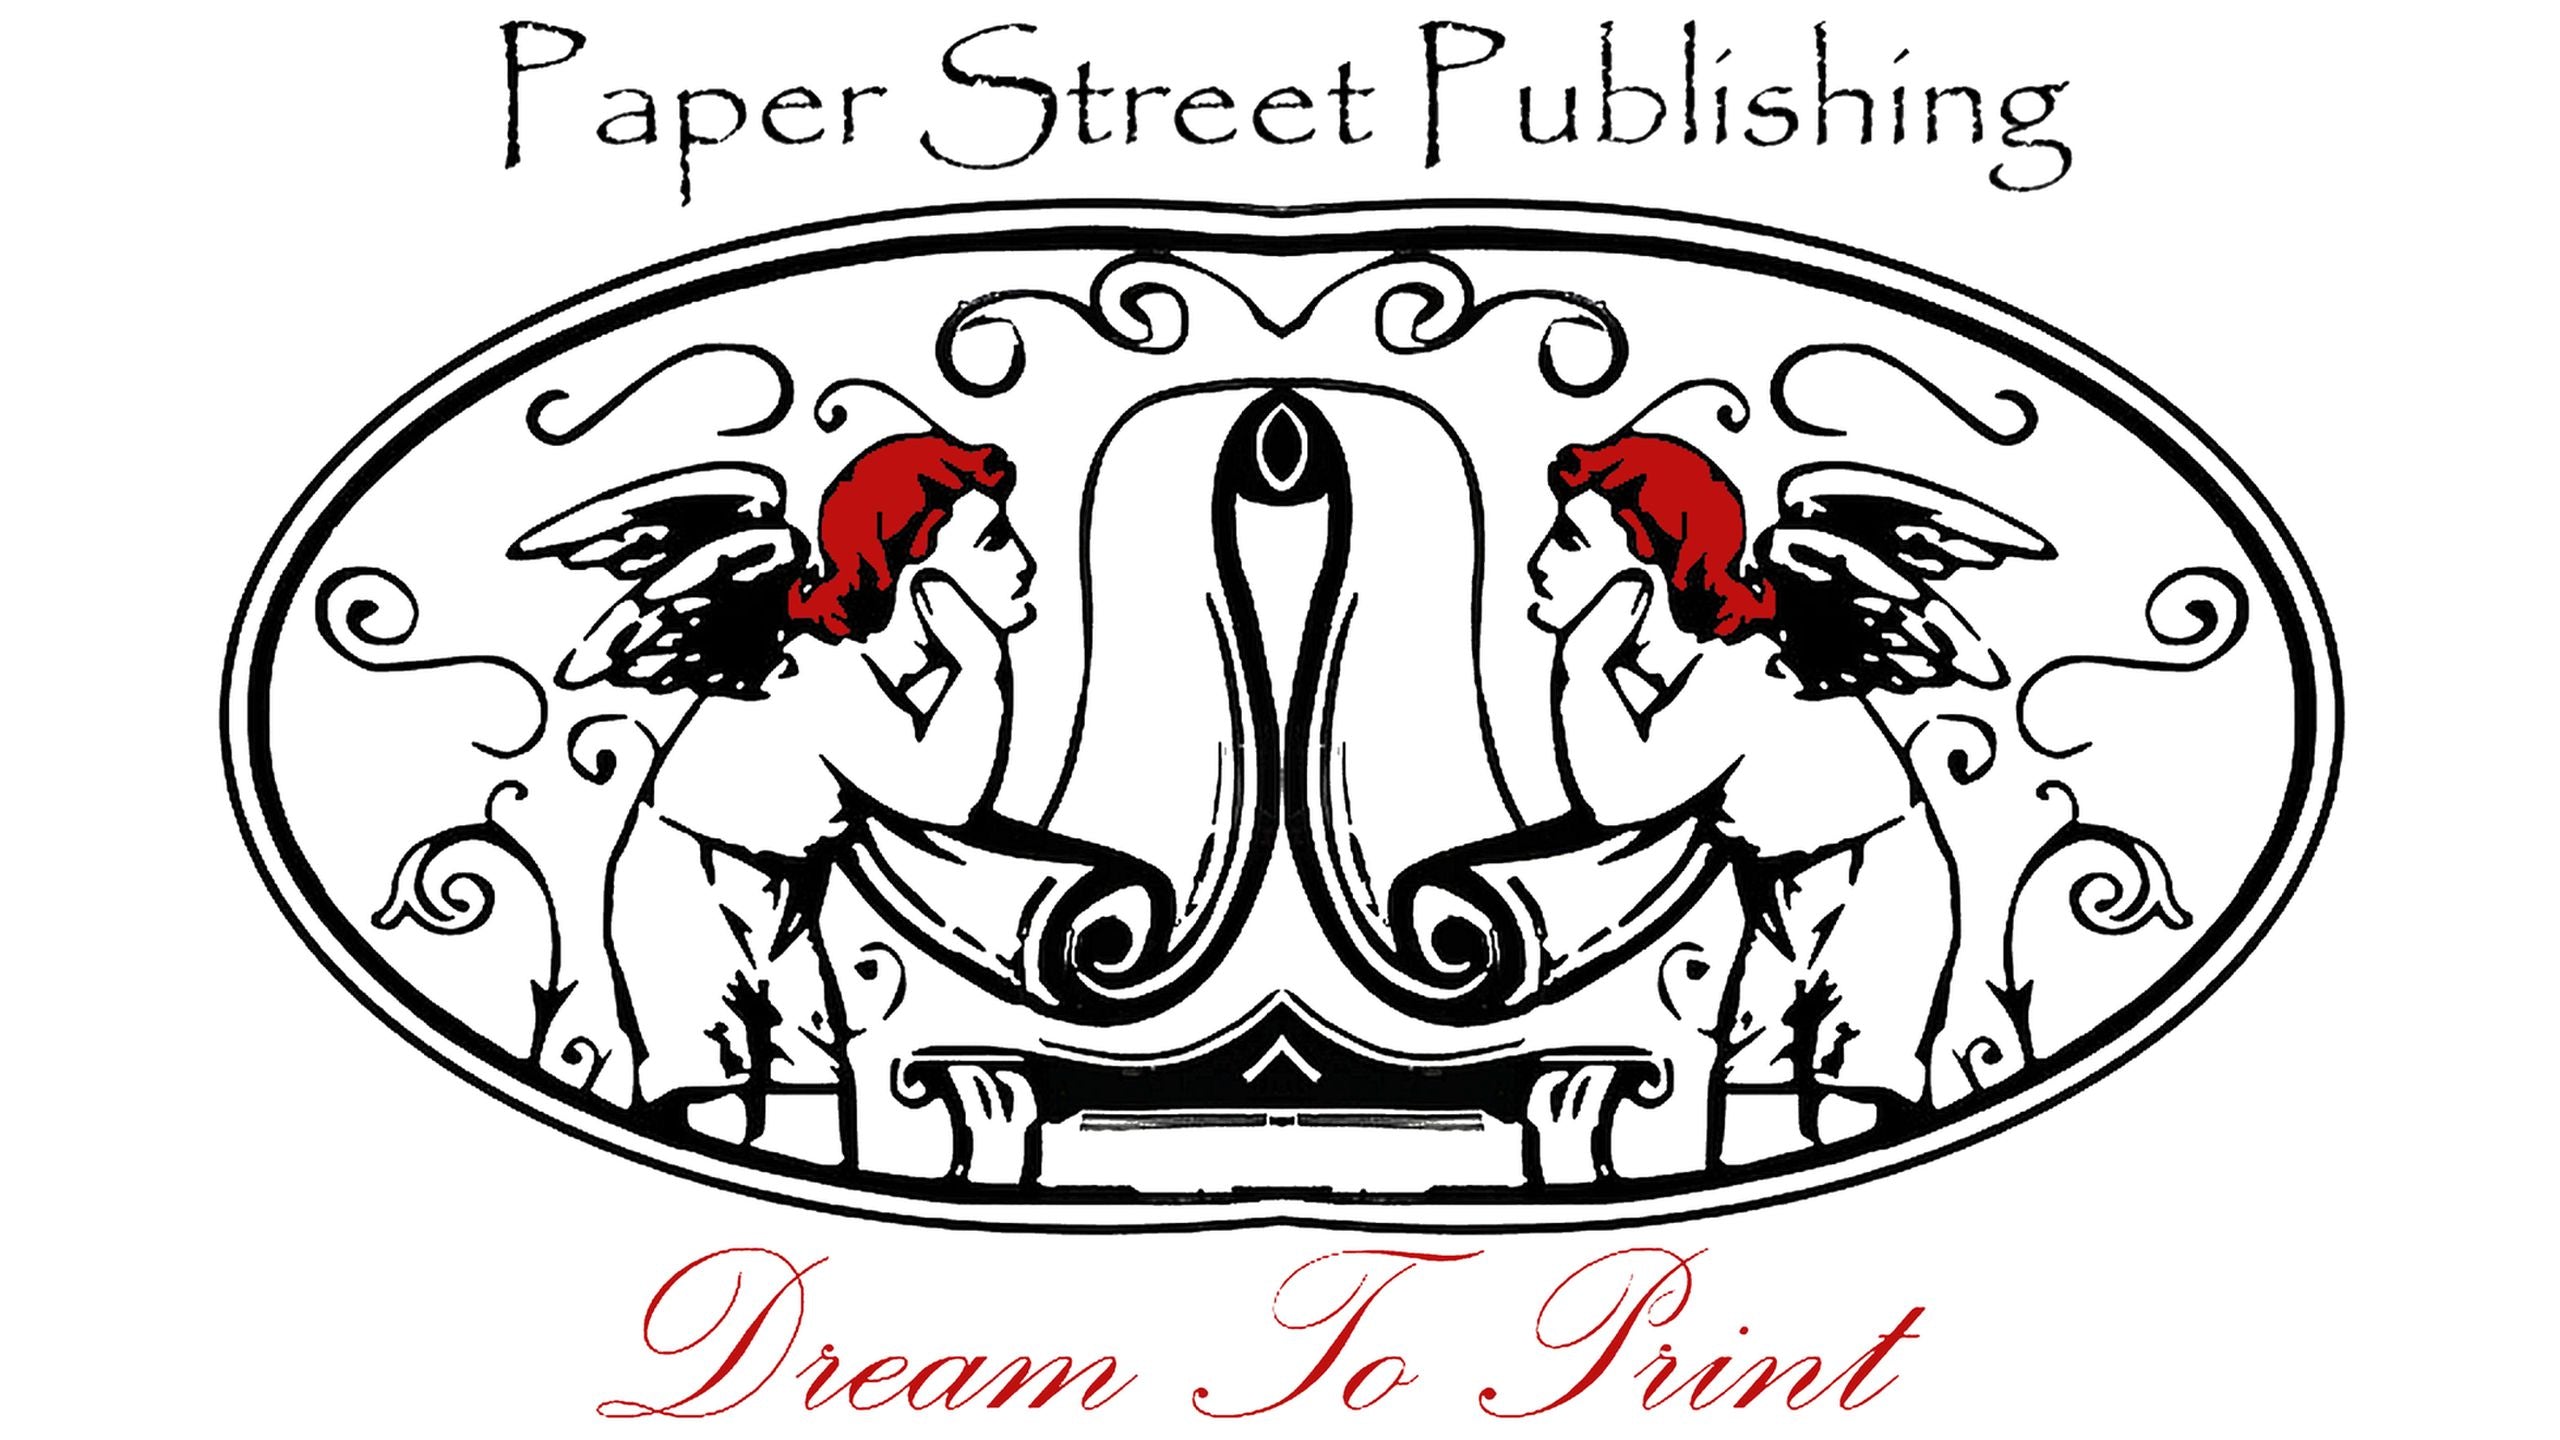 Paper Street Publishing Company background images.